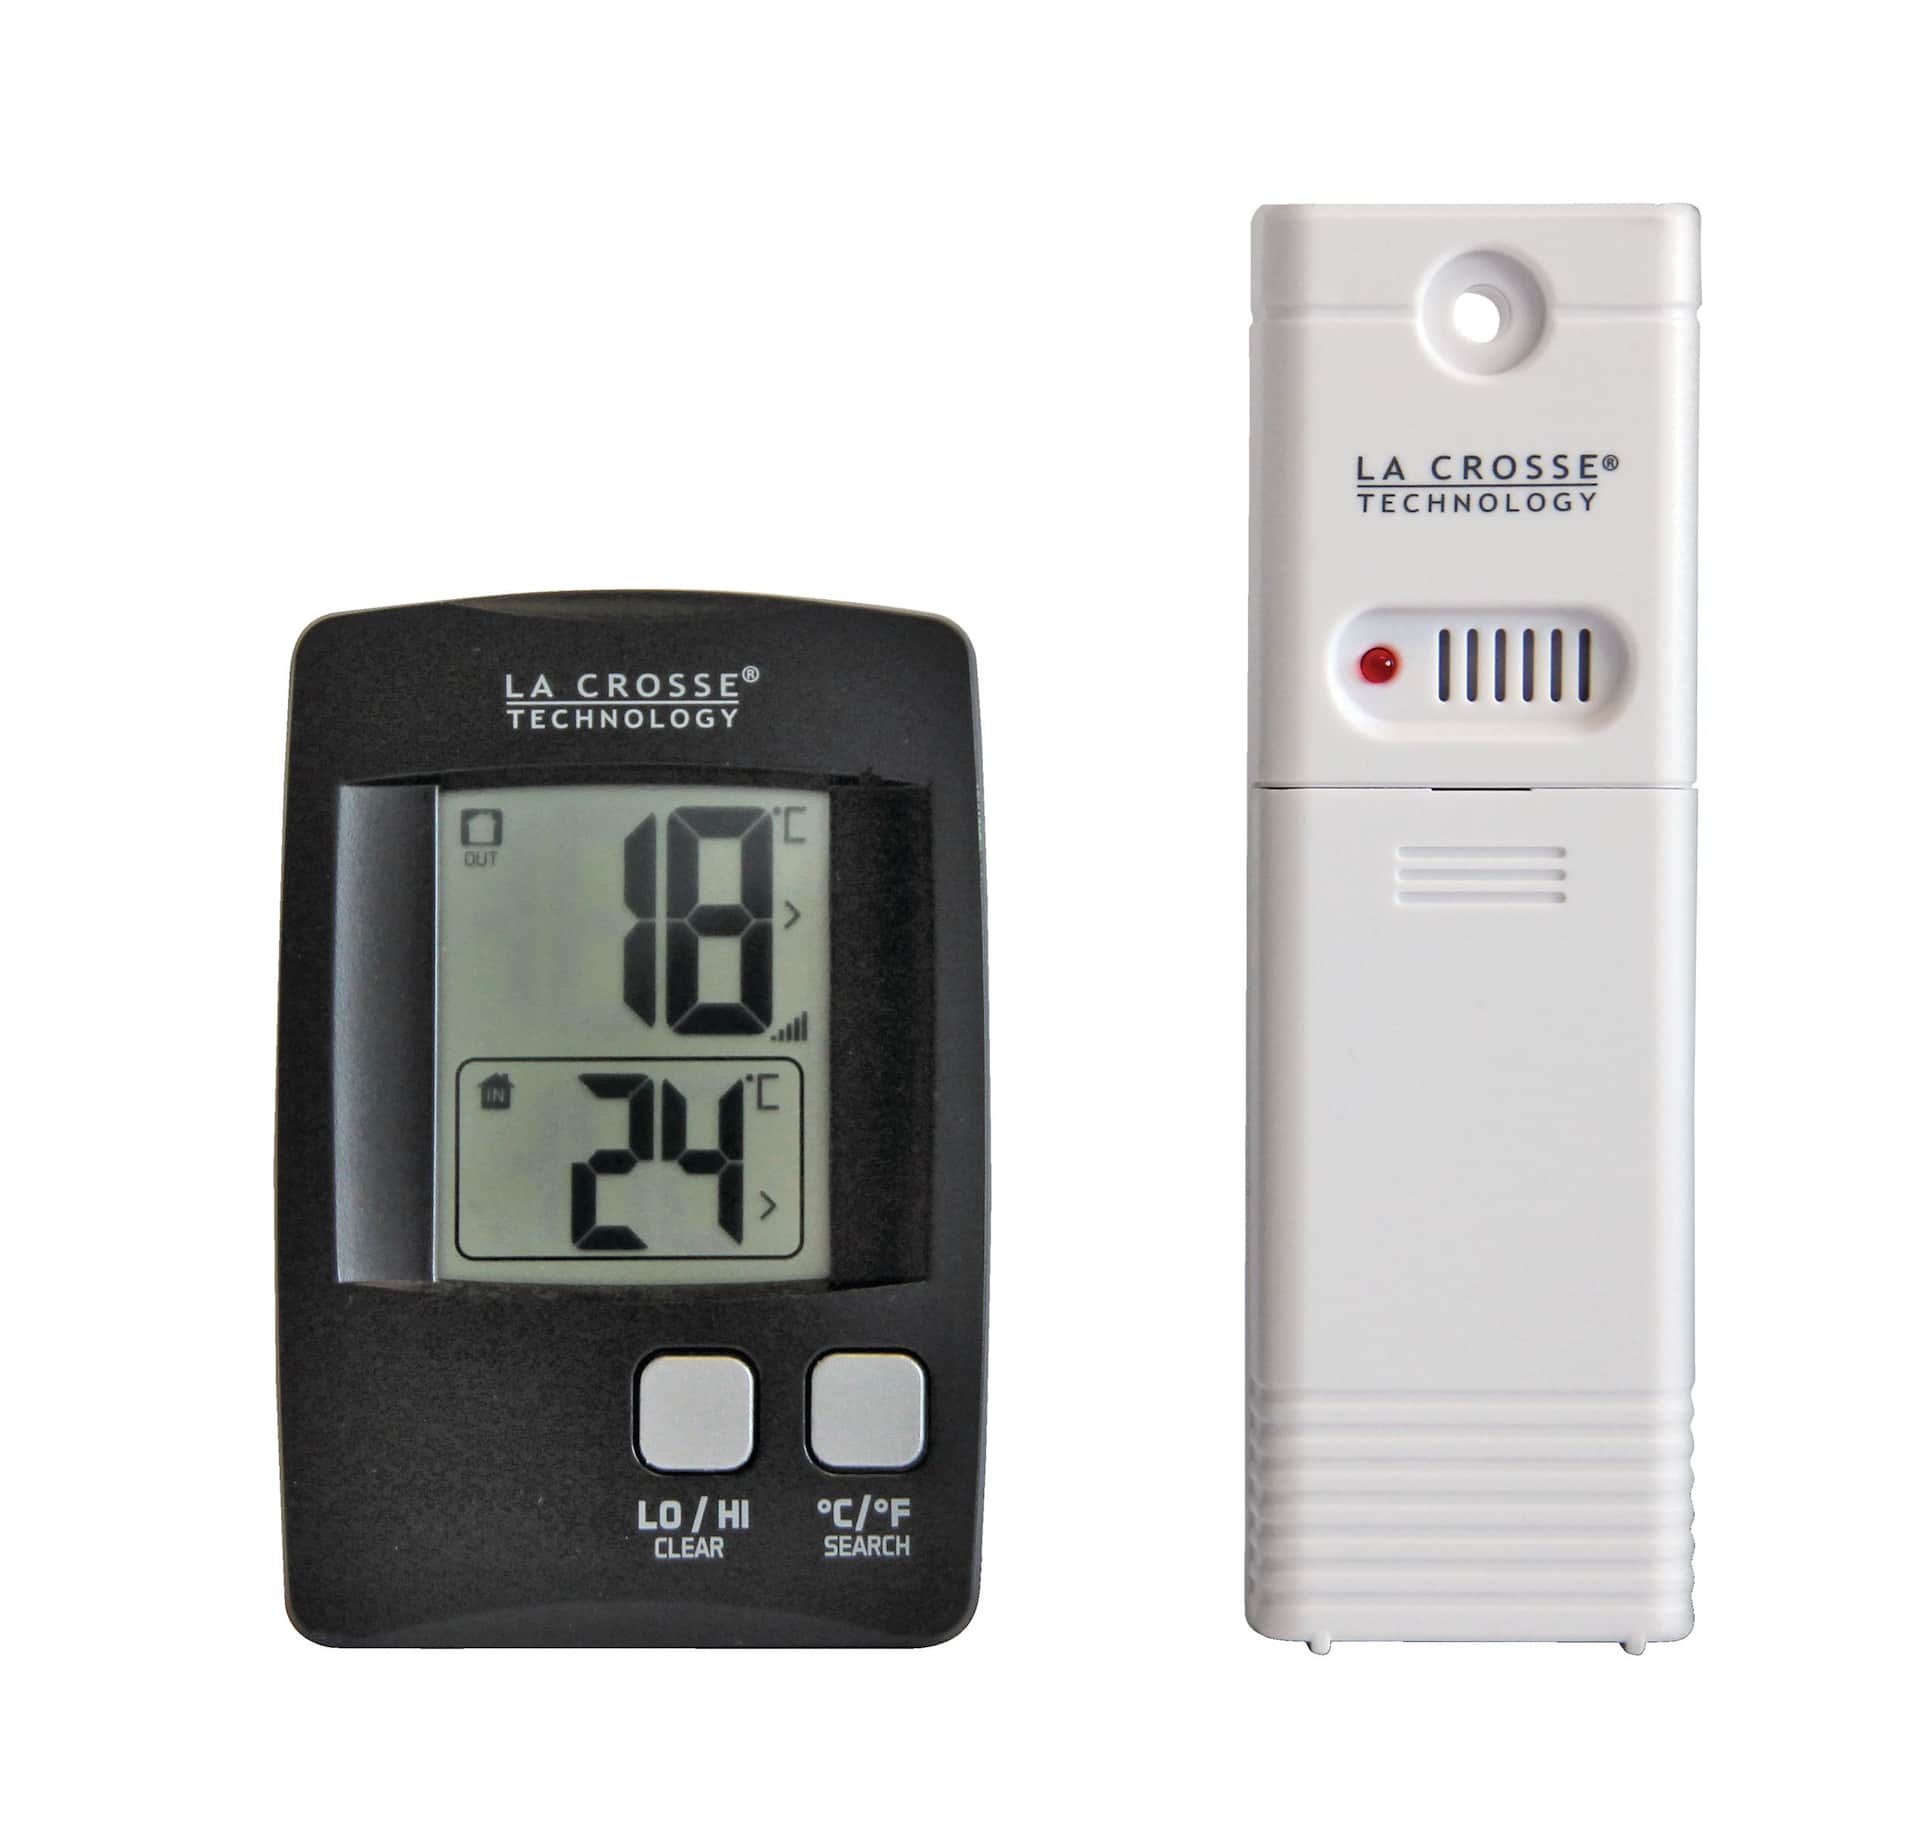 https://media-www.canadiantire.ca/product/living/kitchen/kitchen-tools-thermometers/1427129/lacrosse-wireless-temperature-station-4946ee82-eda5-4f76-ae70-31cdc1b651a9-jpgrendition.jpg